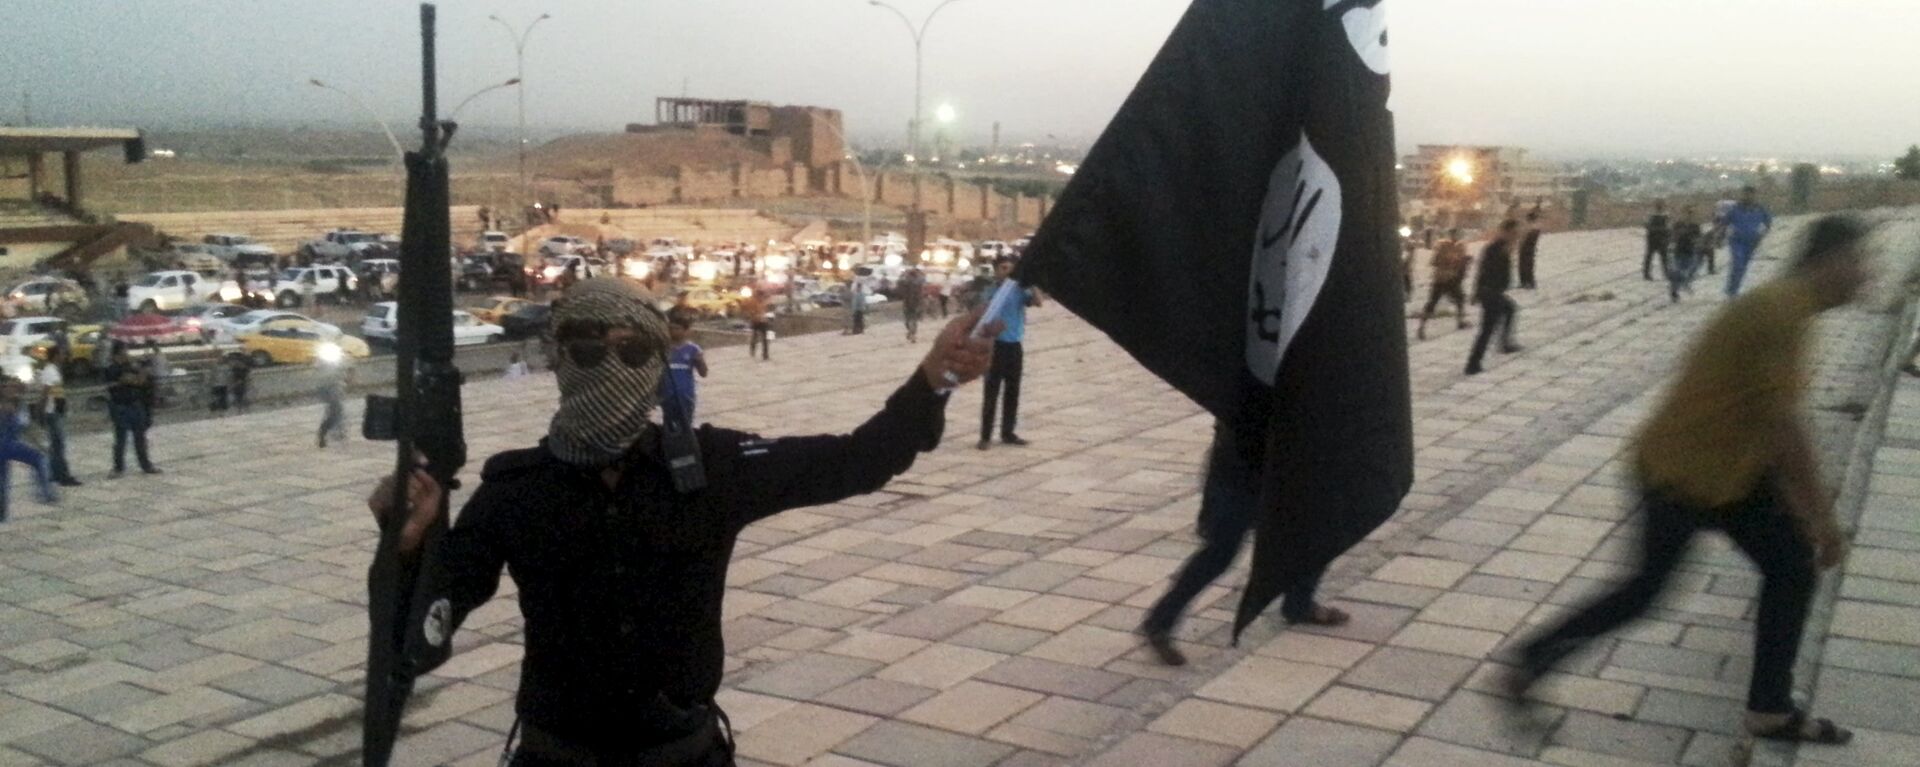 A fighter of Daesh holds an ISIL flag and a weapon on a street in the city of Mosul, Iraq, in this June 23, 2014. - Sputnik Moldova-România, 1920, 19.05.2020